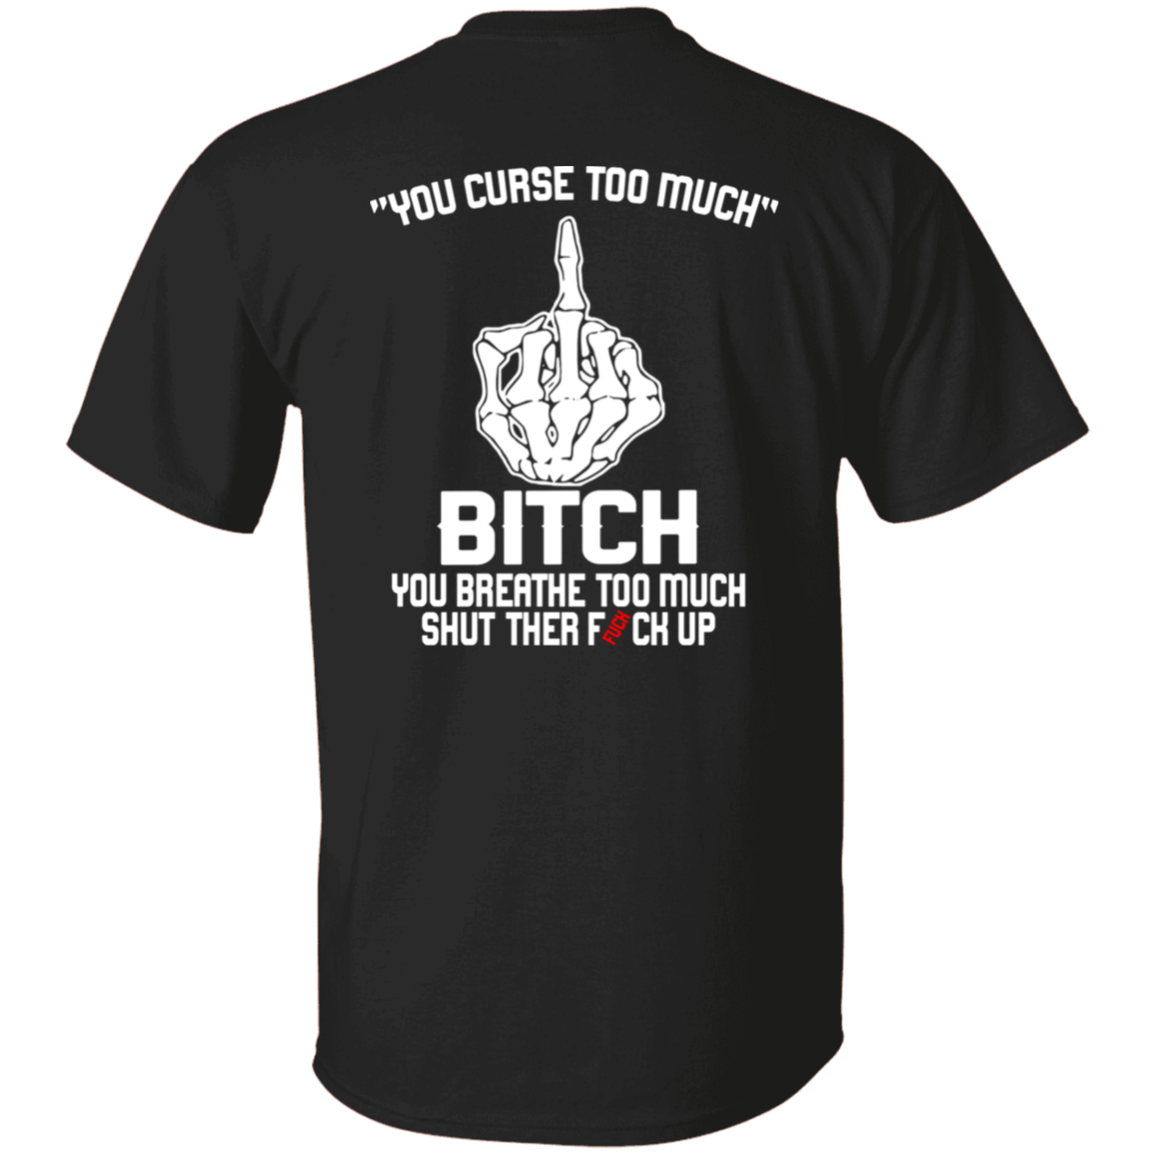 [Back]You Curse Too Muck B*tch You Breathe Too Muck Shirt